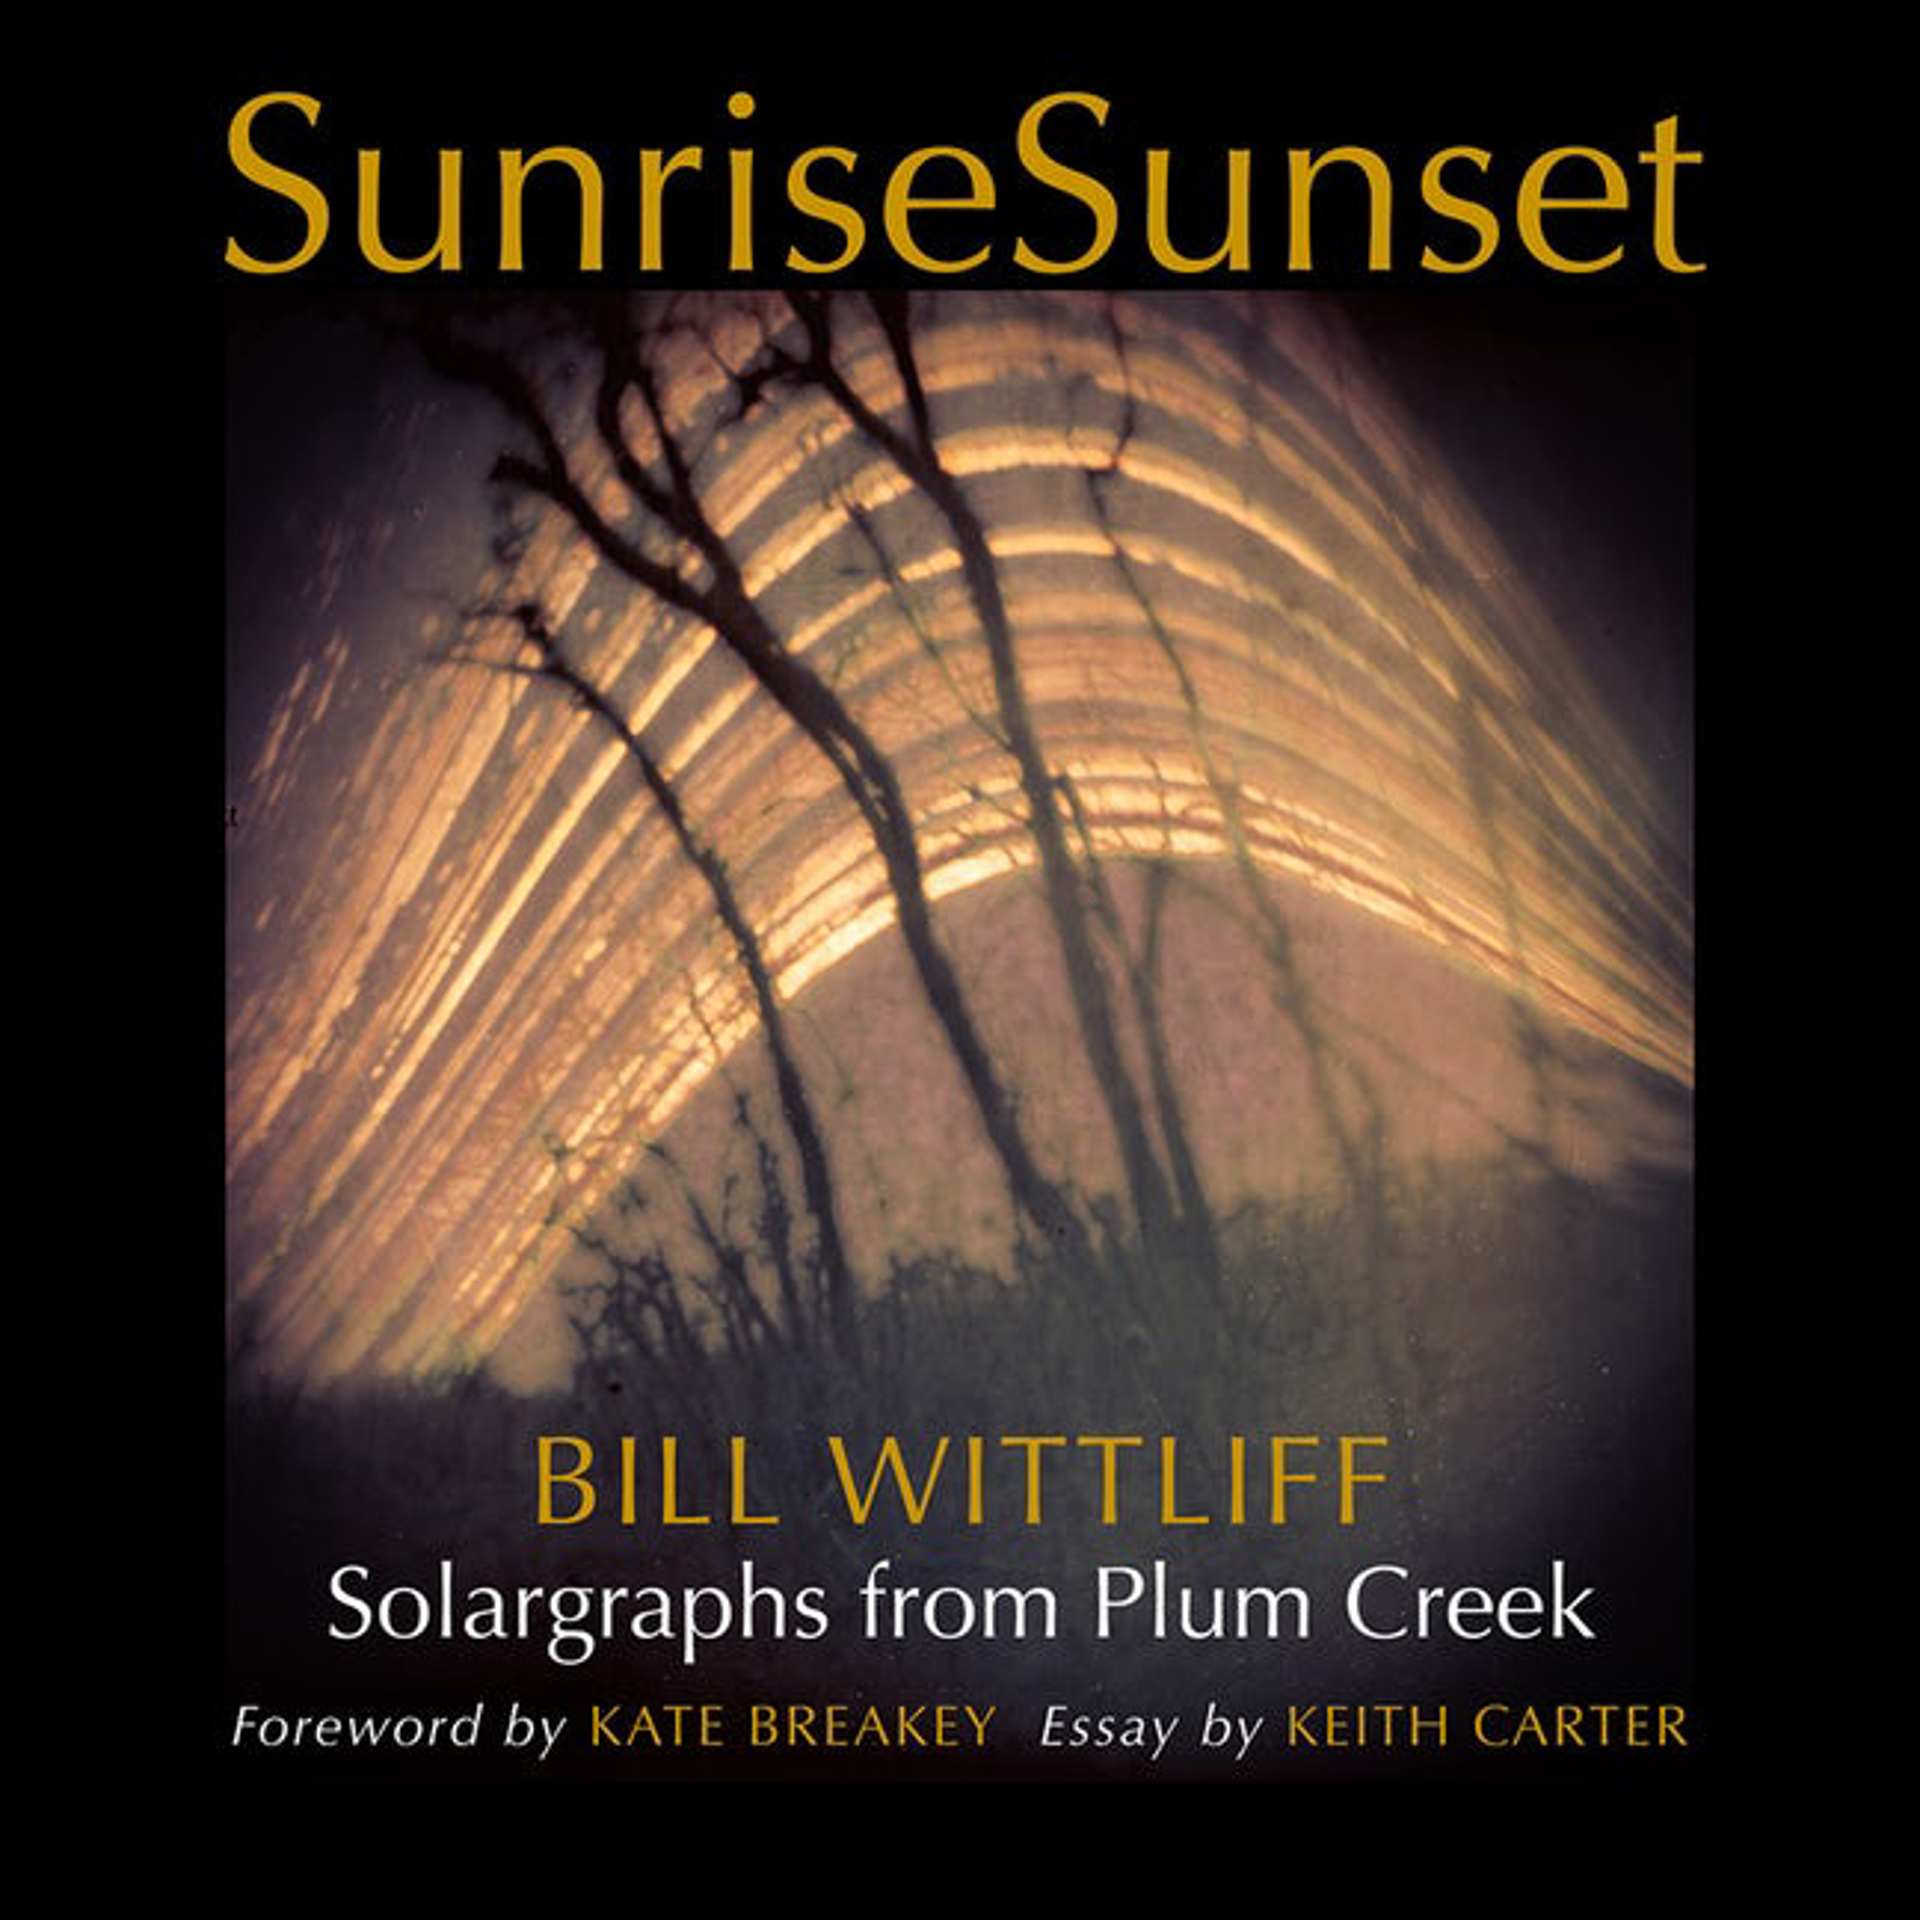 SunriseSunset: Solargraphs from Plum Creek by Bill Witliff by Publications